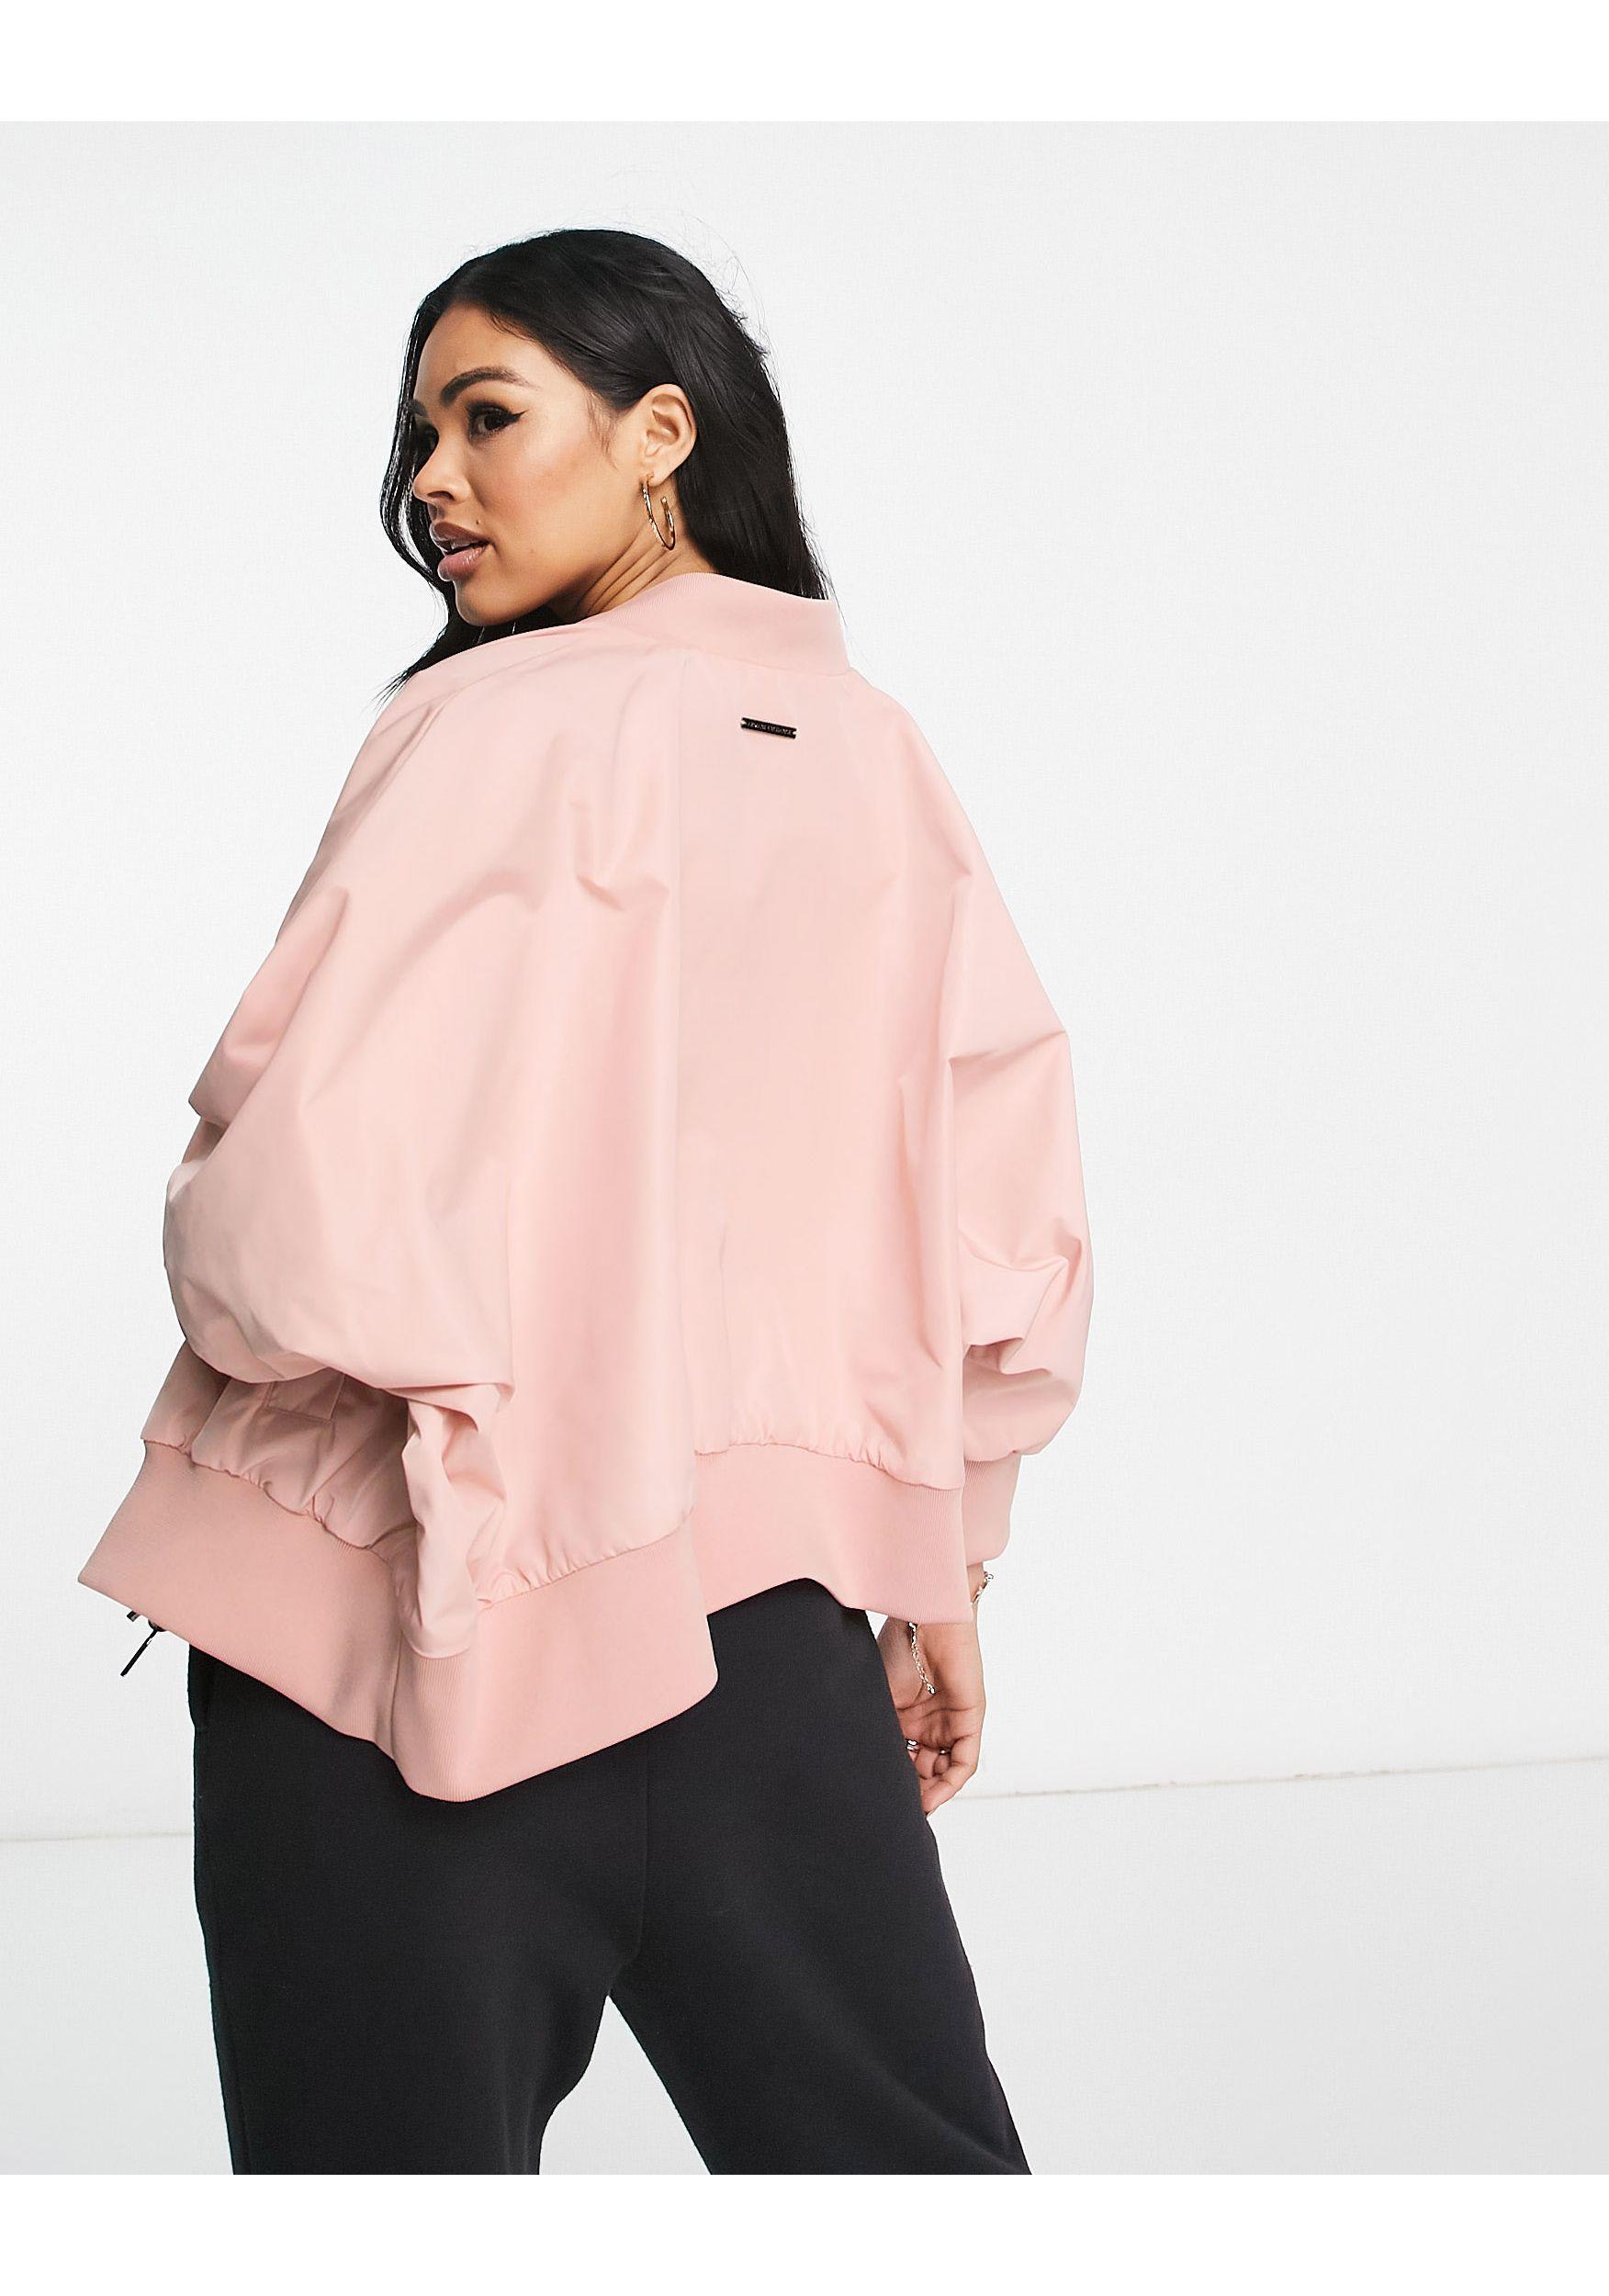 Armani Exchange Relaxed Fit Bomber Jacket in Pink | Lyst